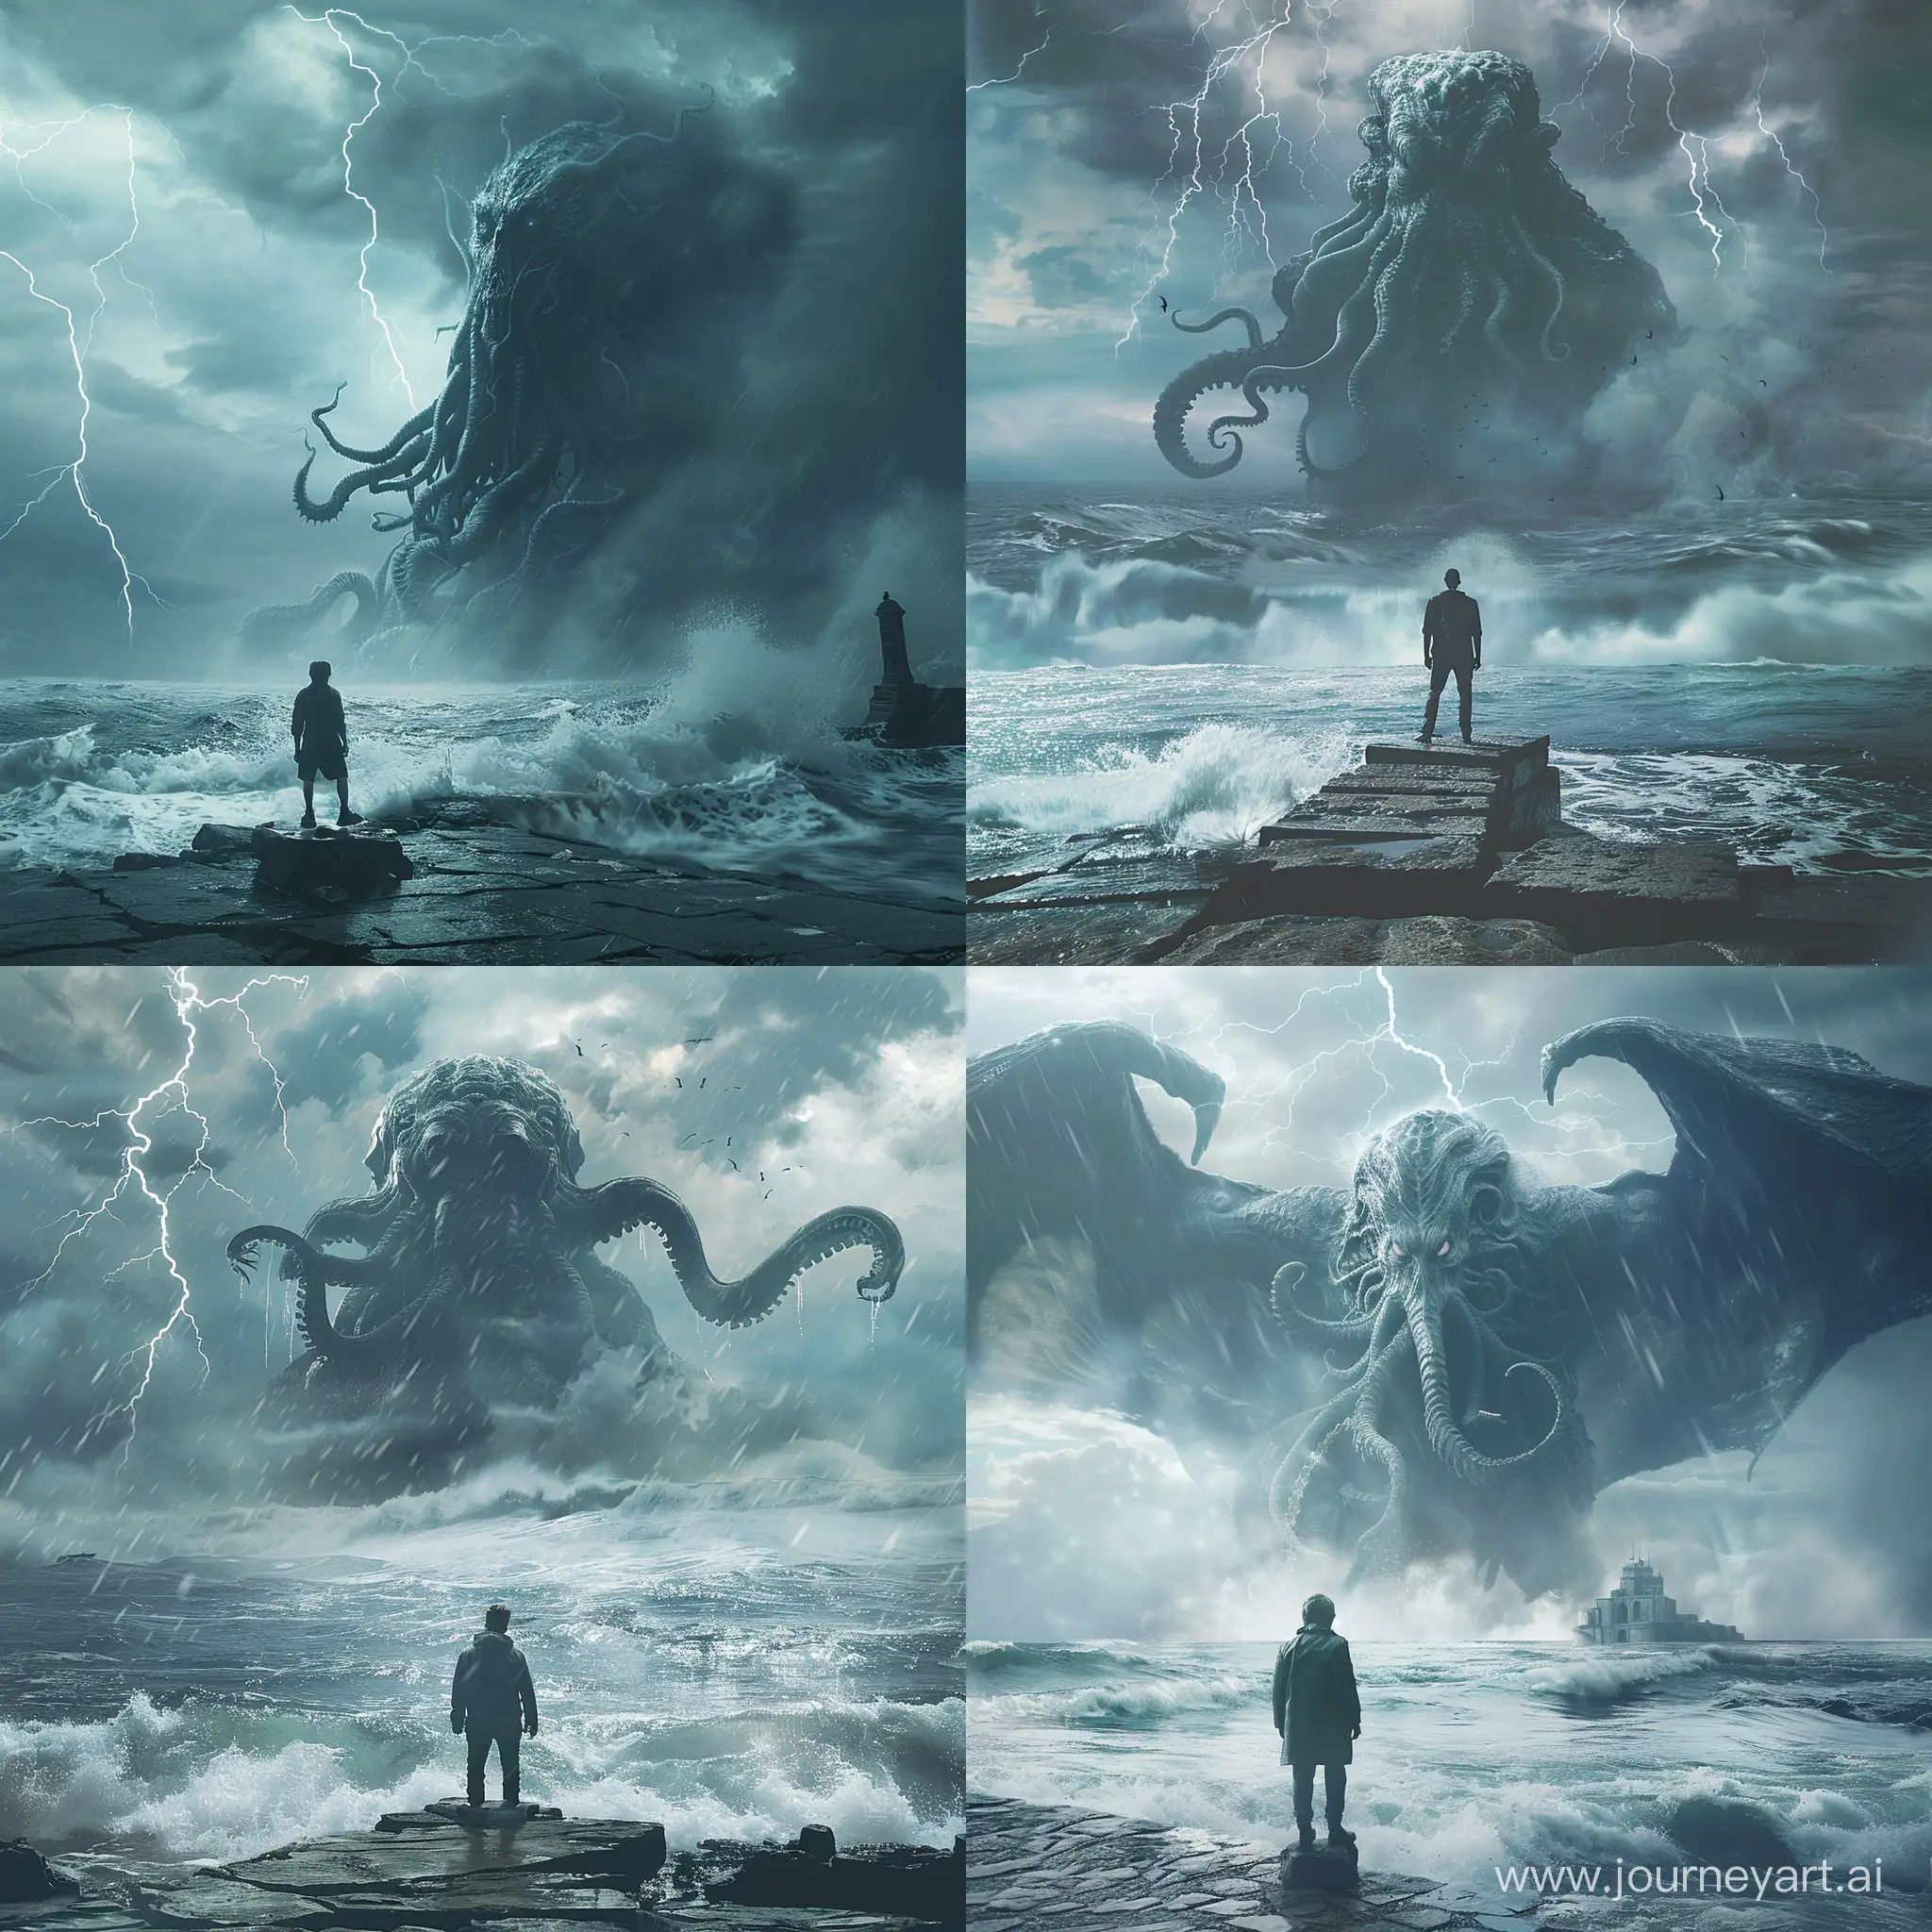 man stands on a stone near the stone shore, against the background of a giant Cthulhu coming out of the ocean, thunder in the sky, waves moving away from the monster, ultra-realistic, hight details, cinematic